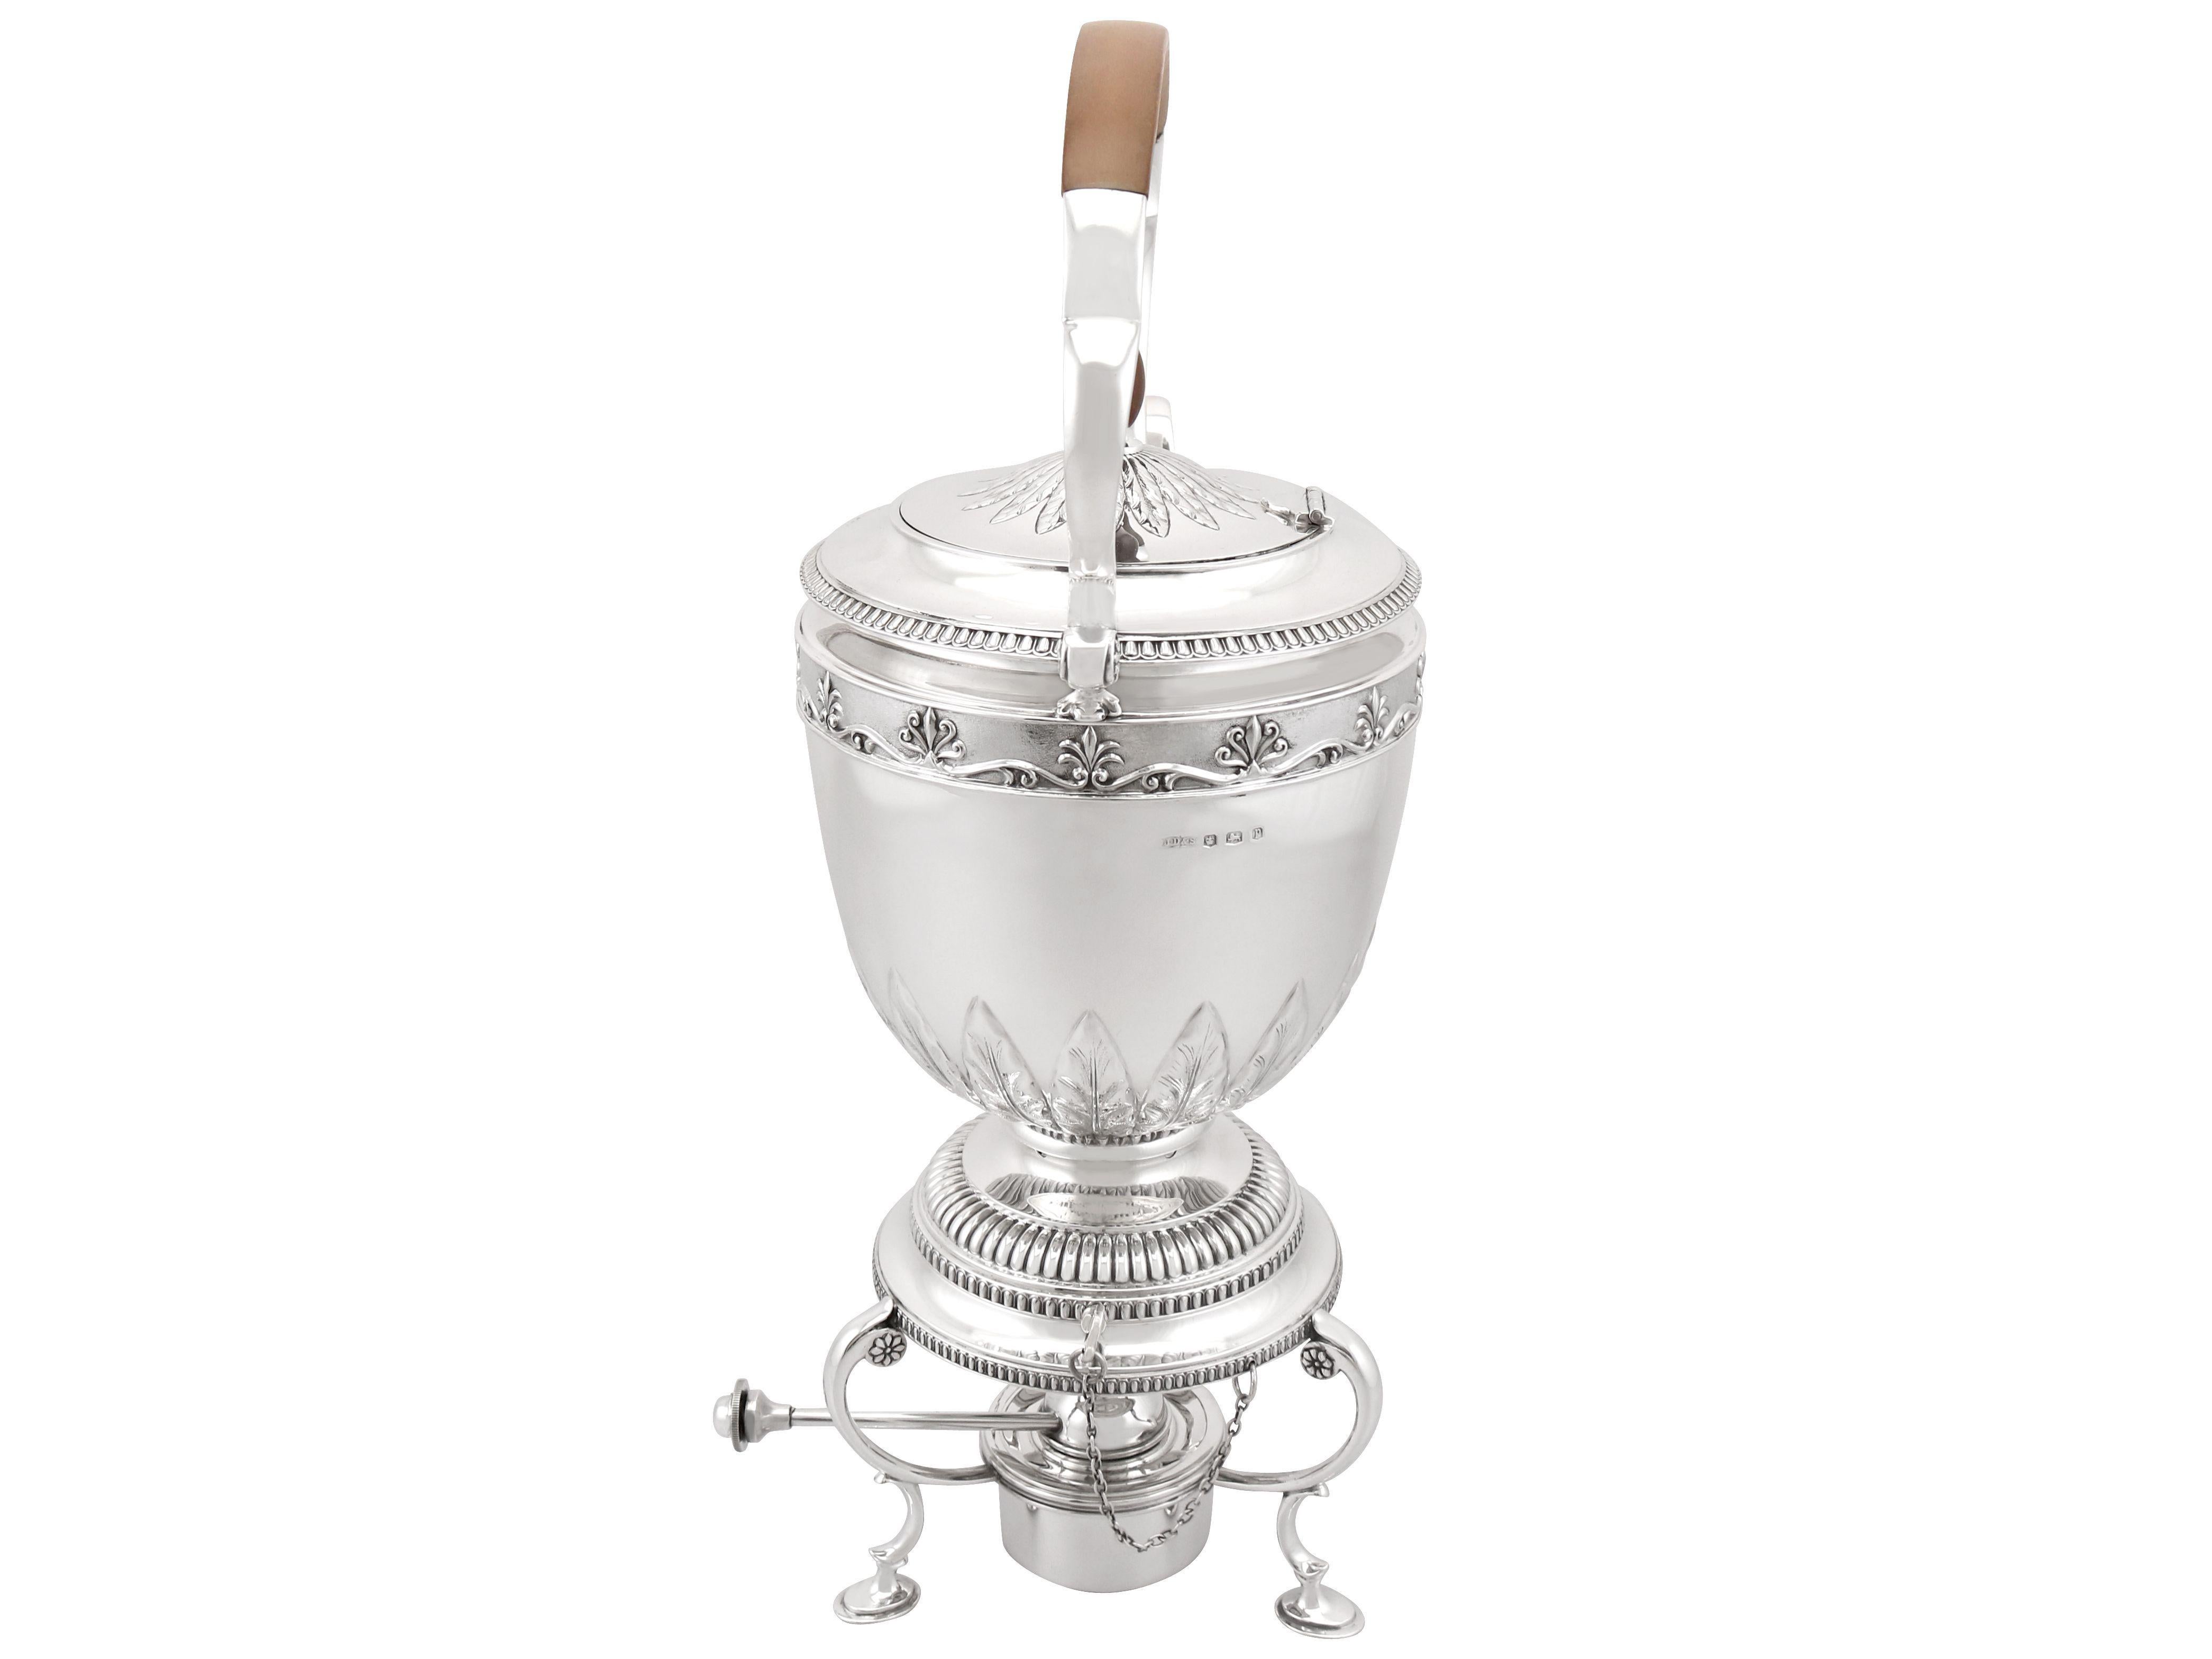 An exceptional, fine and impressive antique George V English sterling silver spirit kettle; an addition to our antique silver teaware collection

This exceptional antique George V sterling silver spirit kettle has a circular rounded form.

The